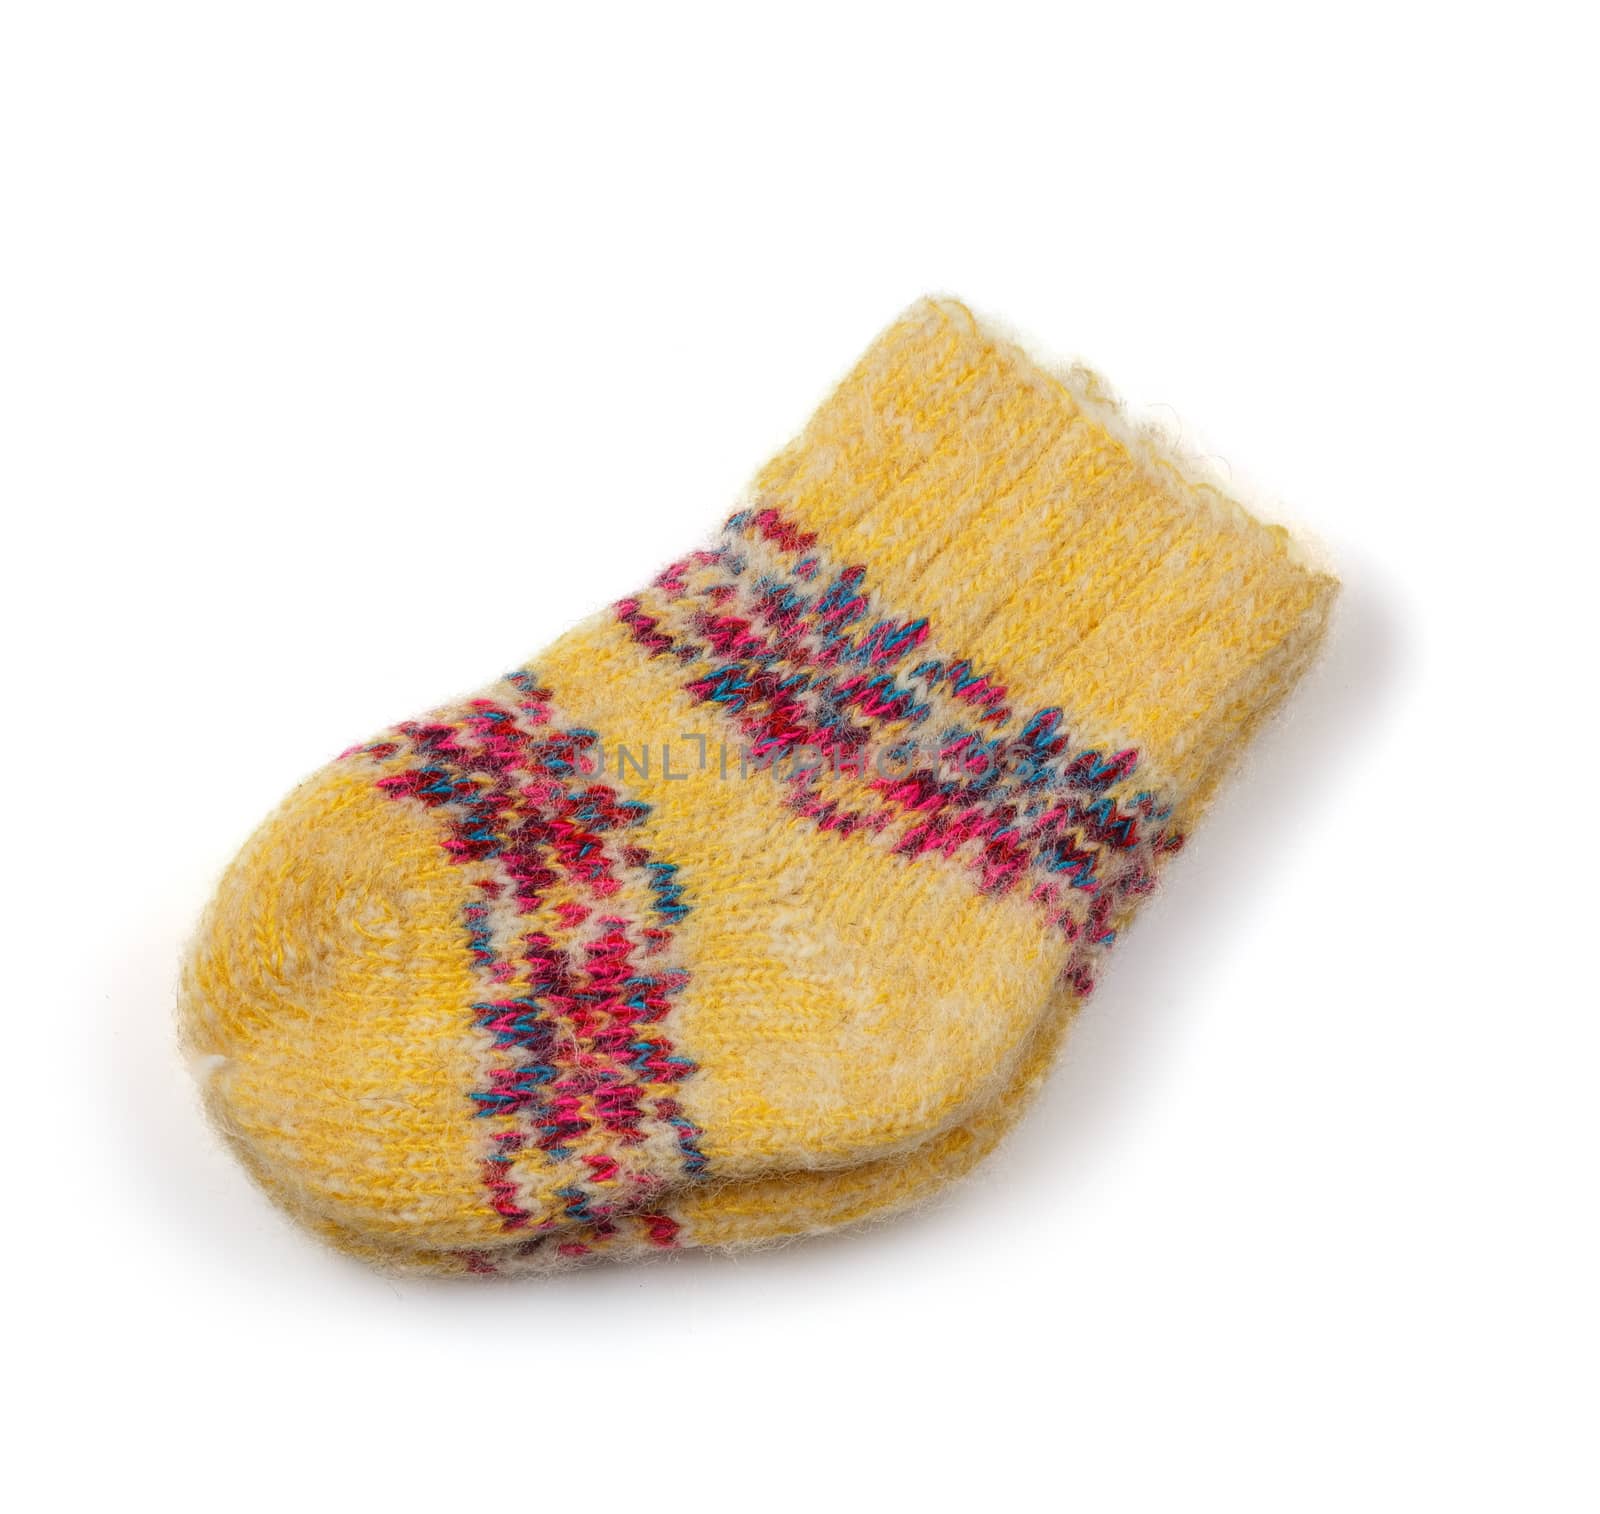 knitted woolen socks on a white background by ires007